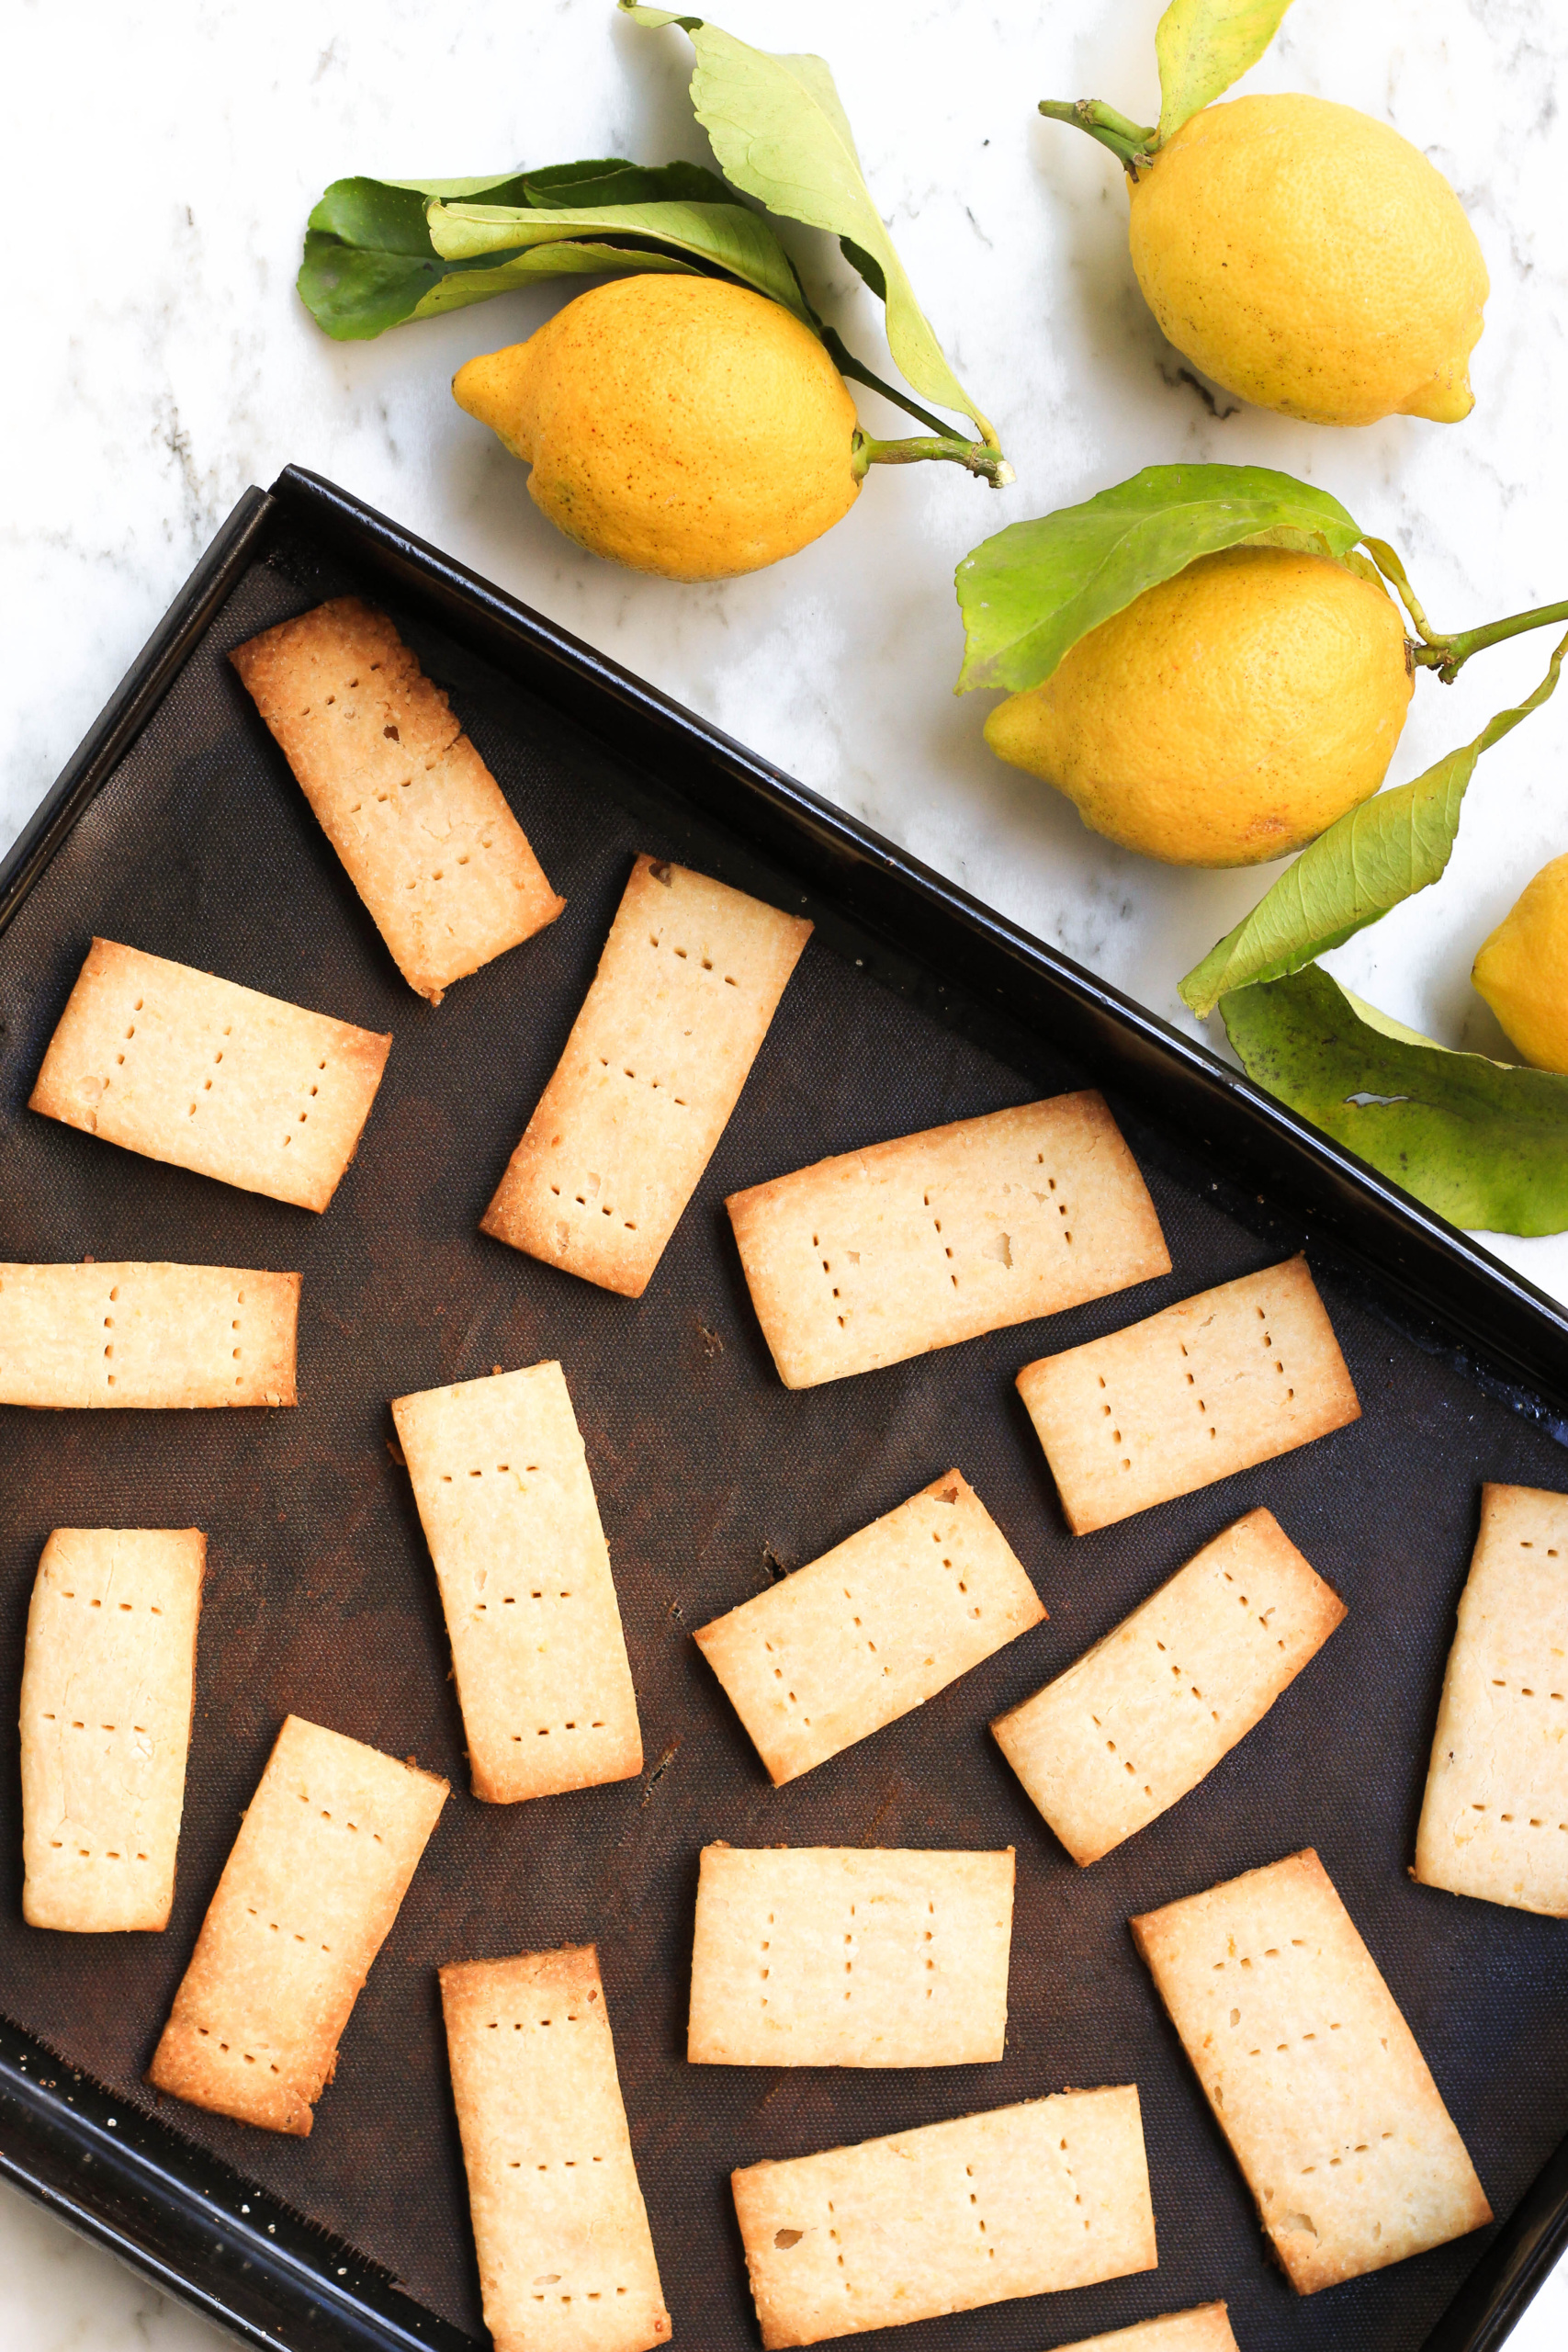 Freshly baked gluten-free shortbread cookies on parchment-lined baking sheet.